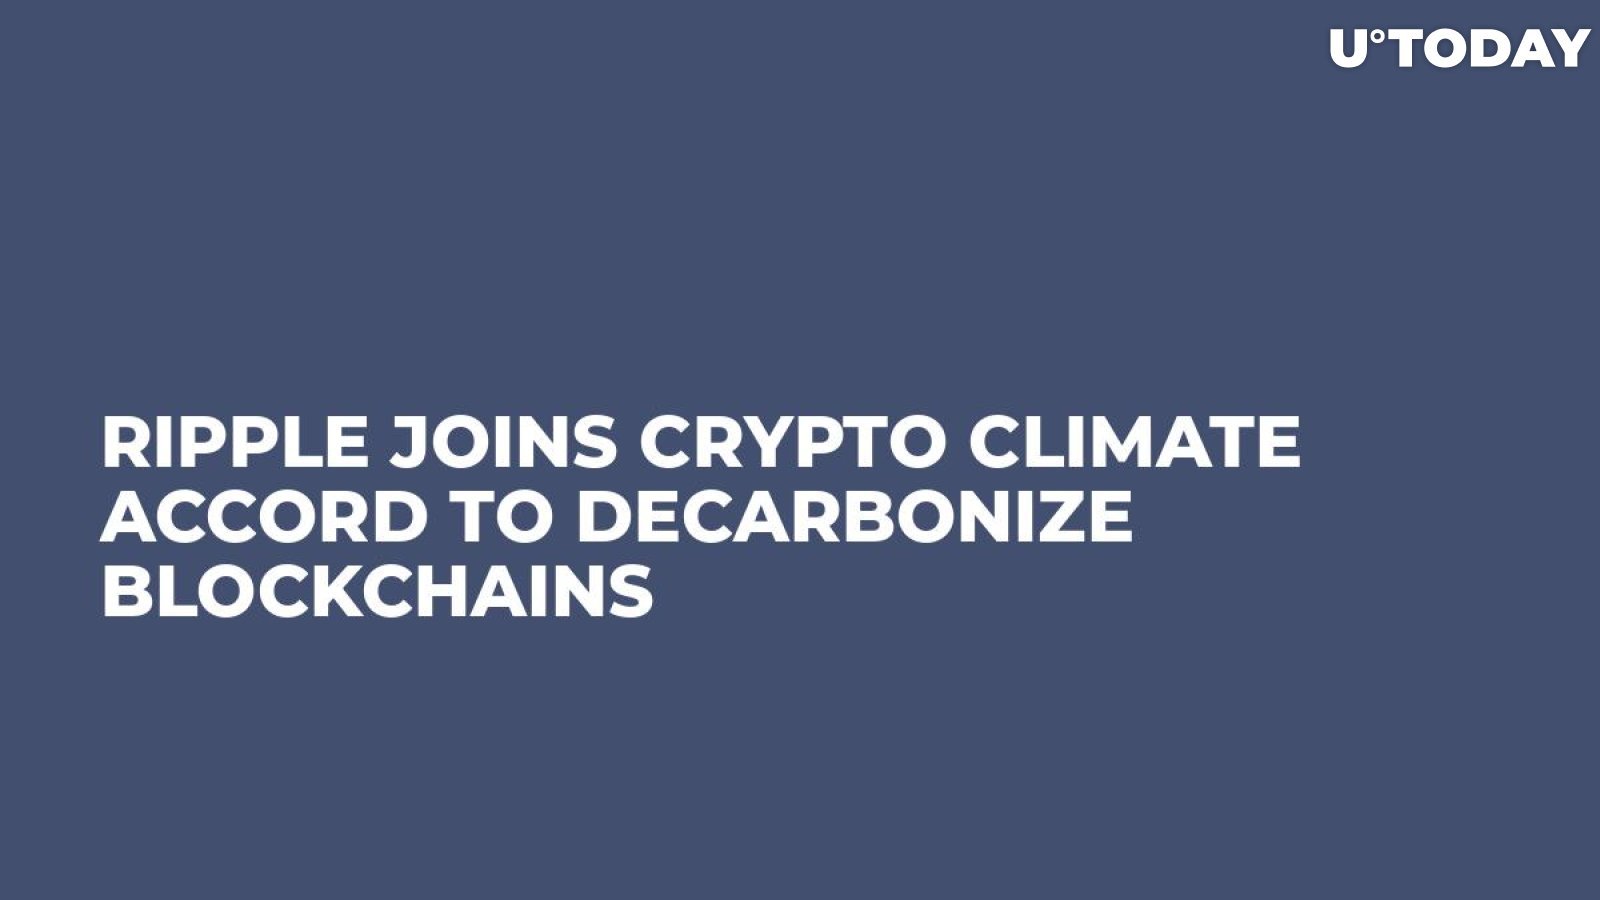 Ripple Joins Crypto Climate Accord to Decarbonize Blockchains